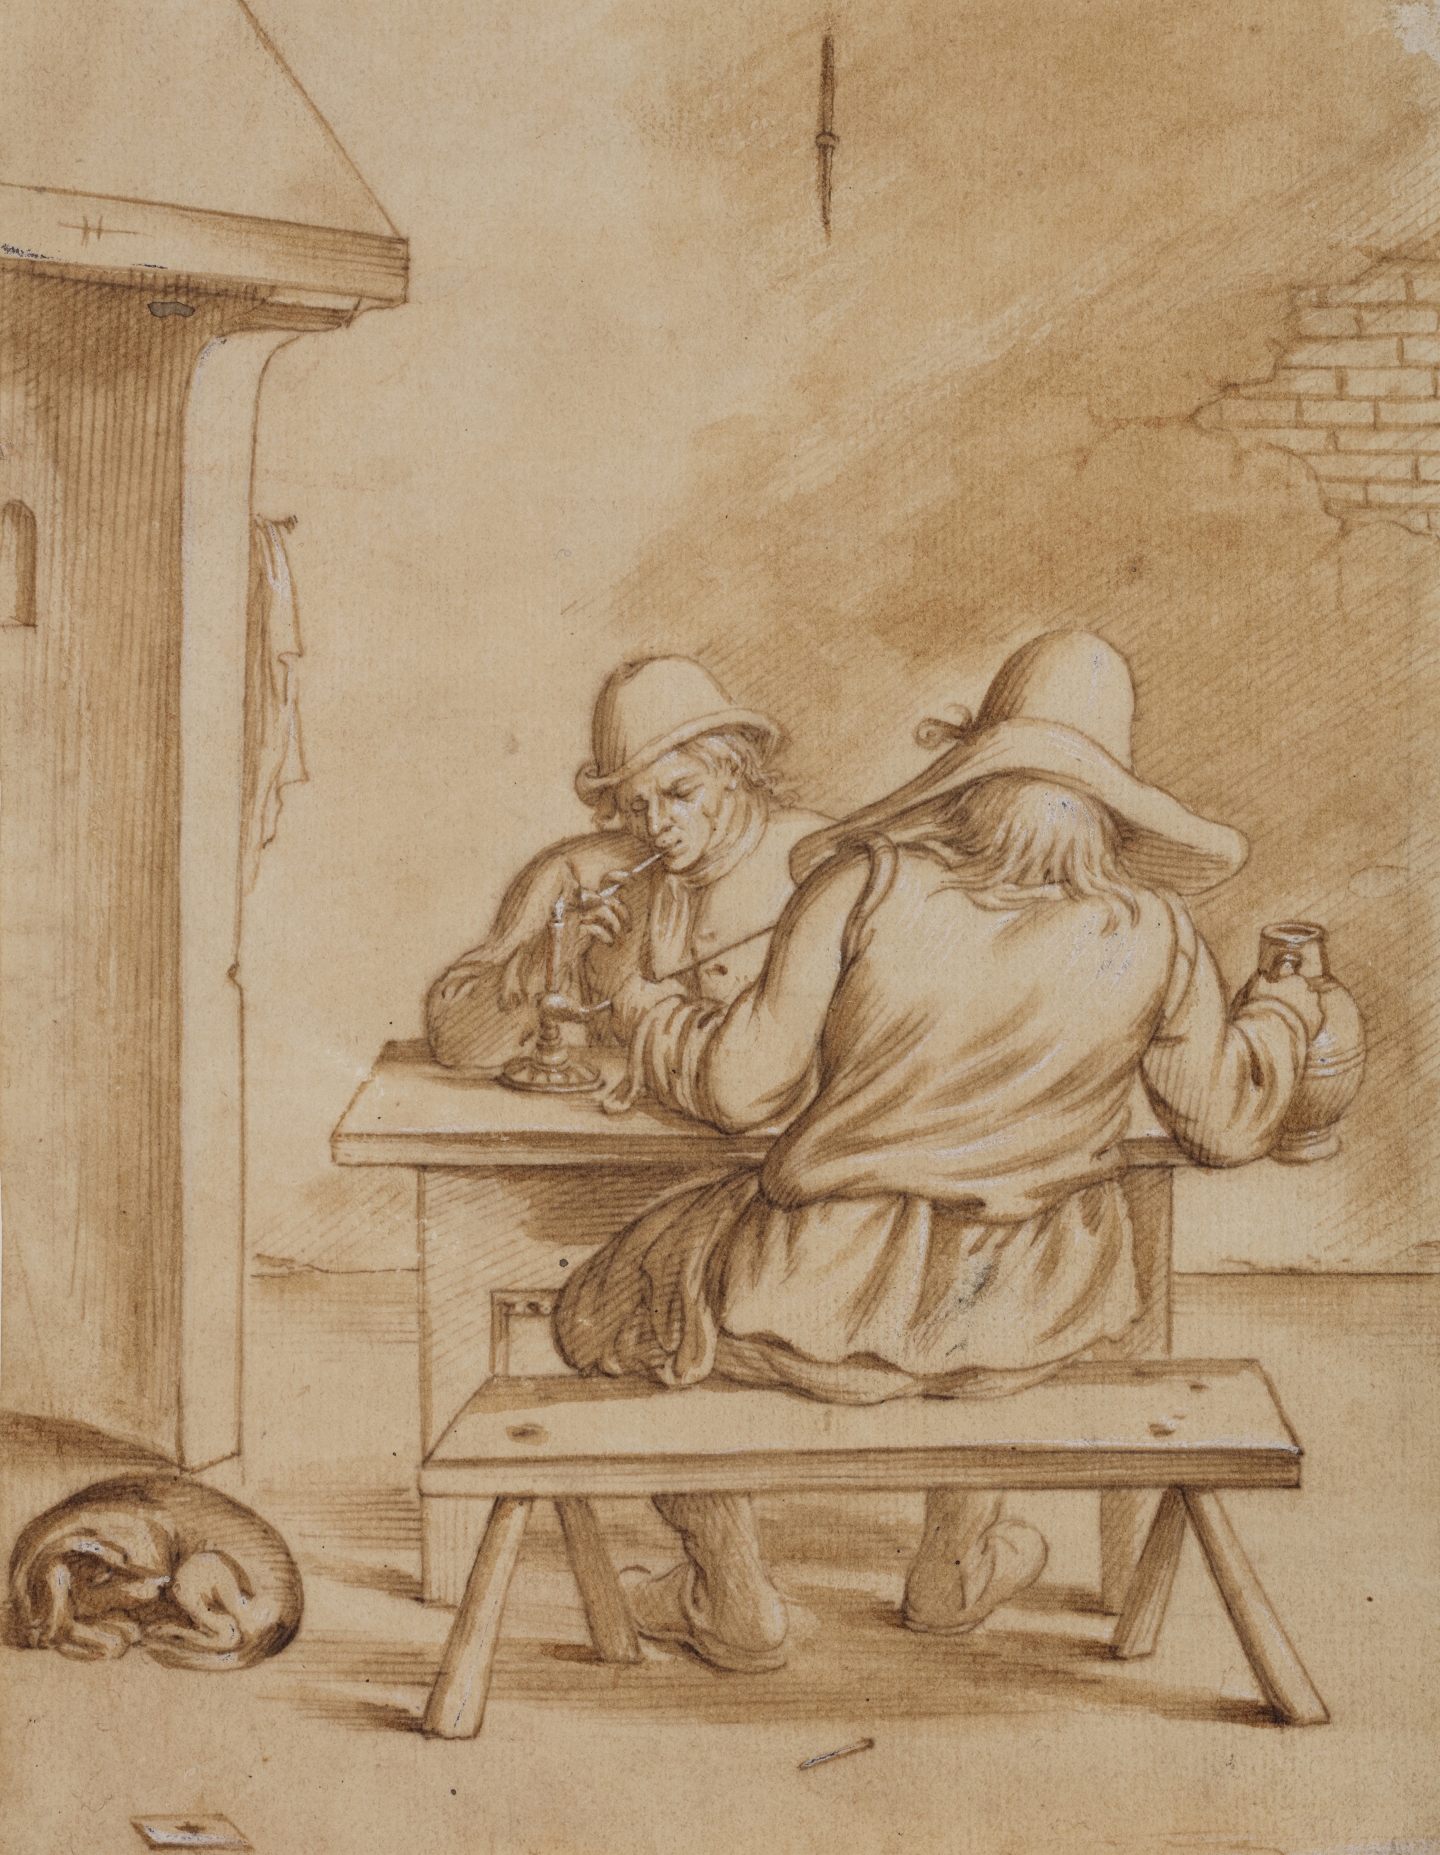 L. Brakelman (c.1660-after 1718) Interior with two men smoking, drinking and playing cards.